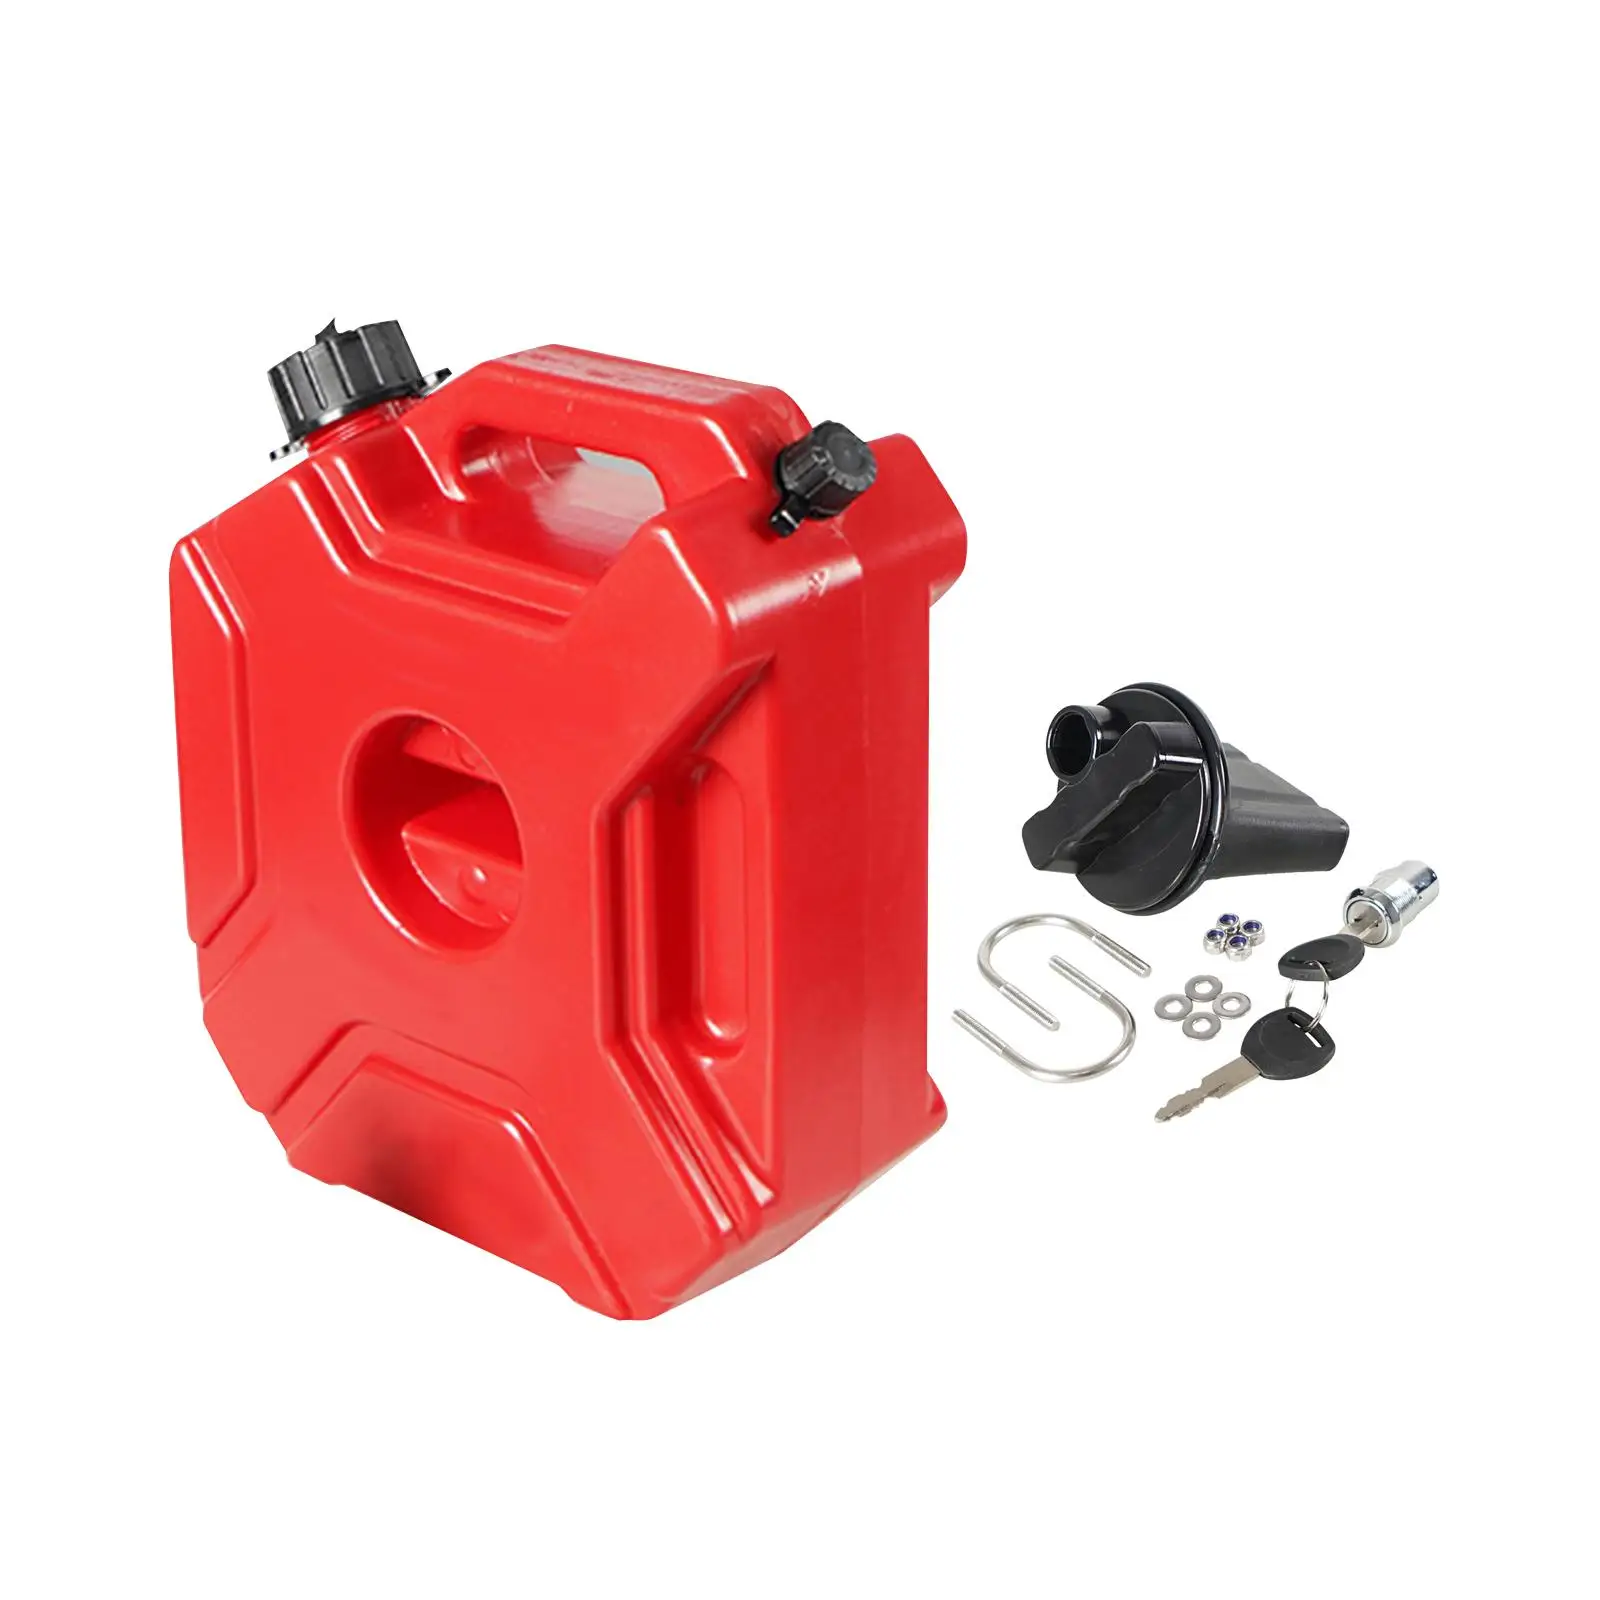 Petrol Tanks 5L Easily Install with Lock Universal Fuel Tank Cans Spare for Motocross Car Travel Most Cars SUV Parts